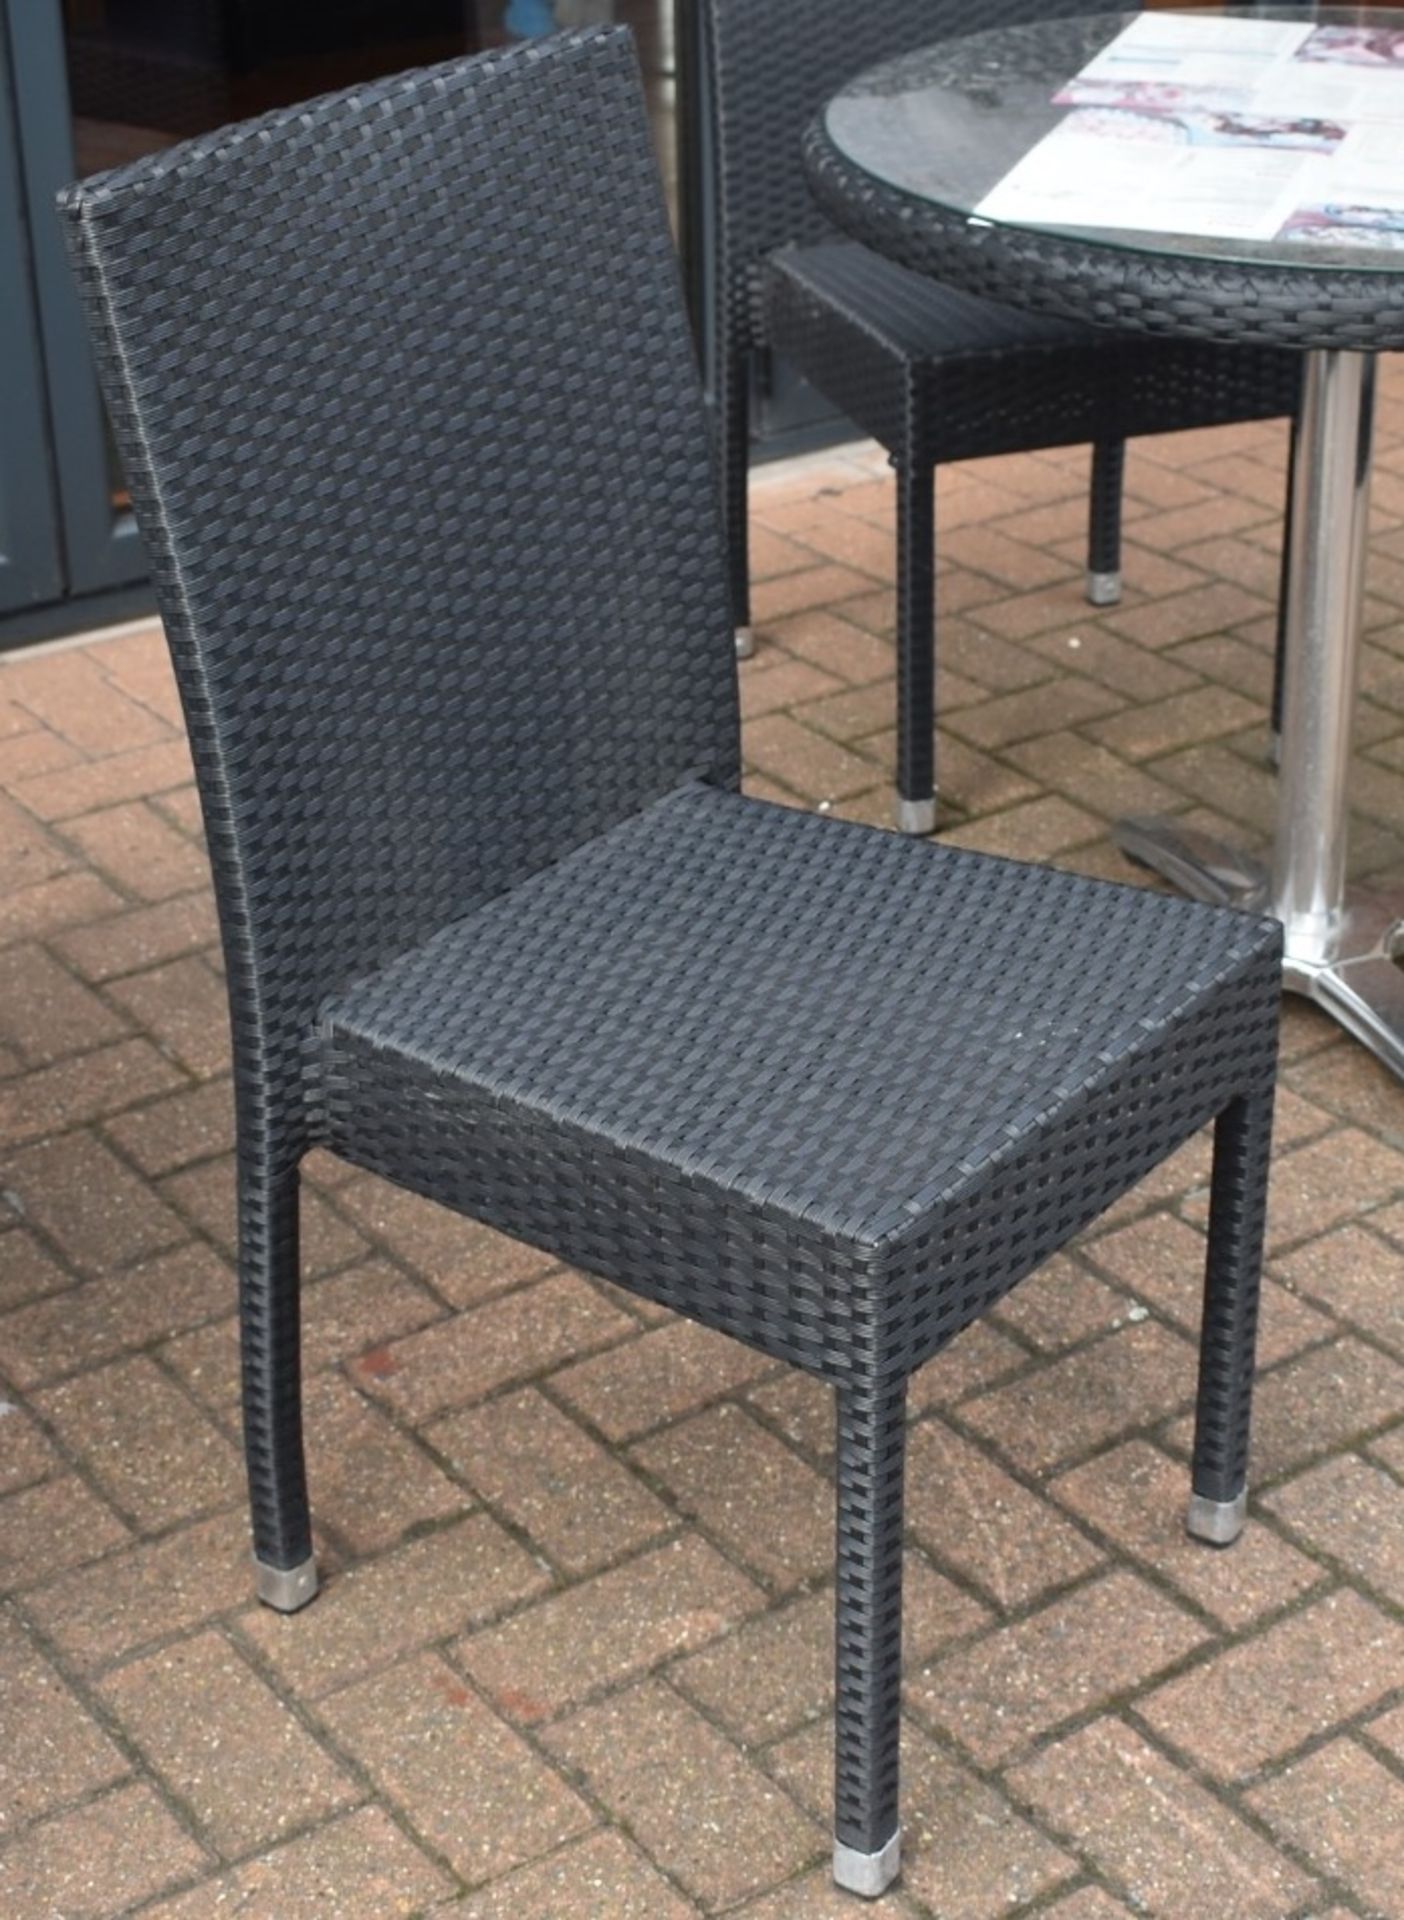 1 x Rattan Garden Table and Chair Set - Includes 1 x Square Rattan Table With Chrome Base and - Image 3 of 8